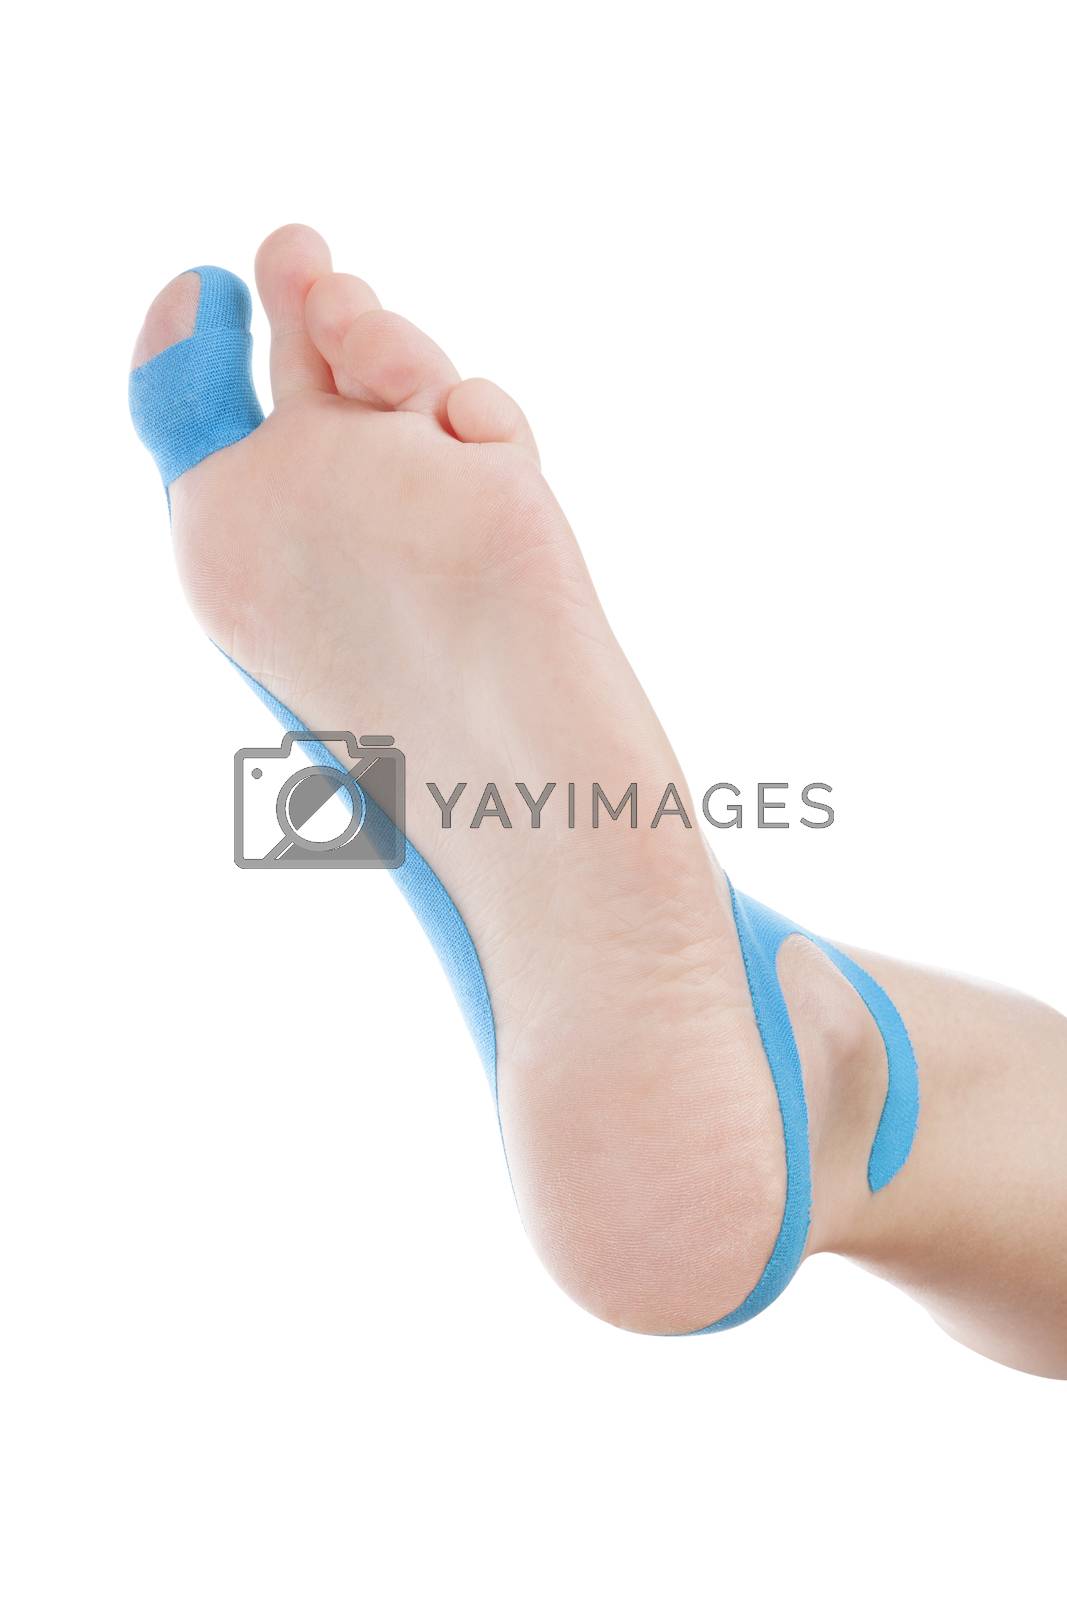 Royalty free image of Therapeutic tape on female foot. by eskymaks